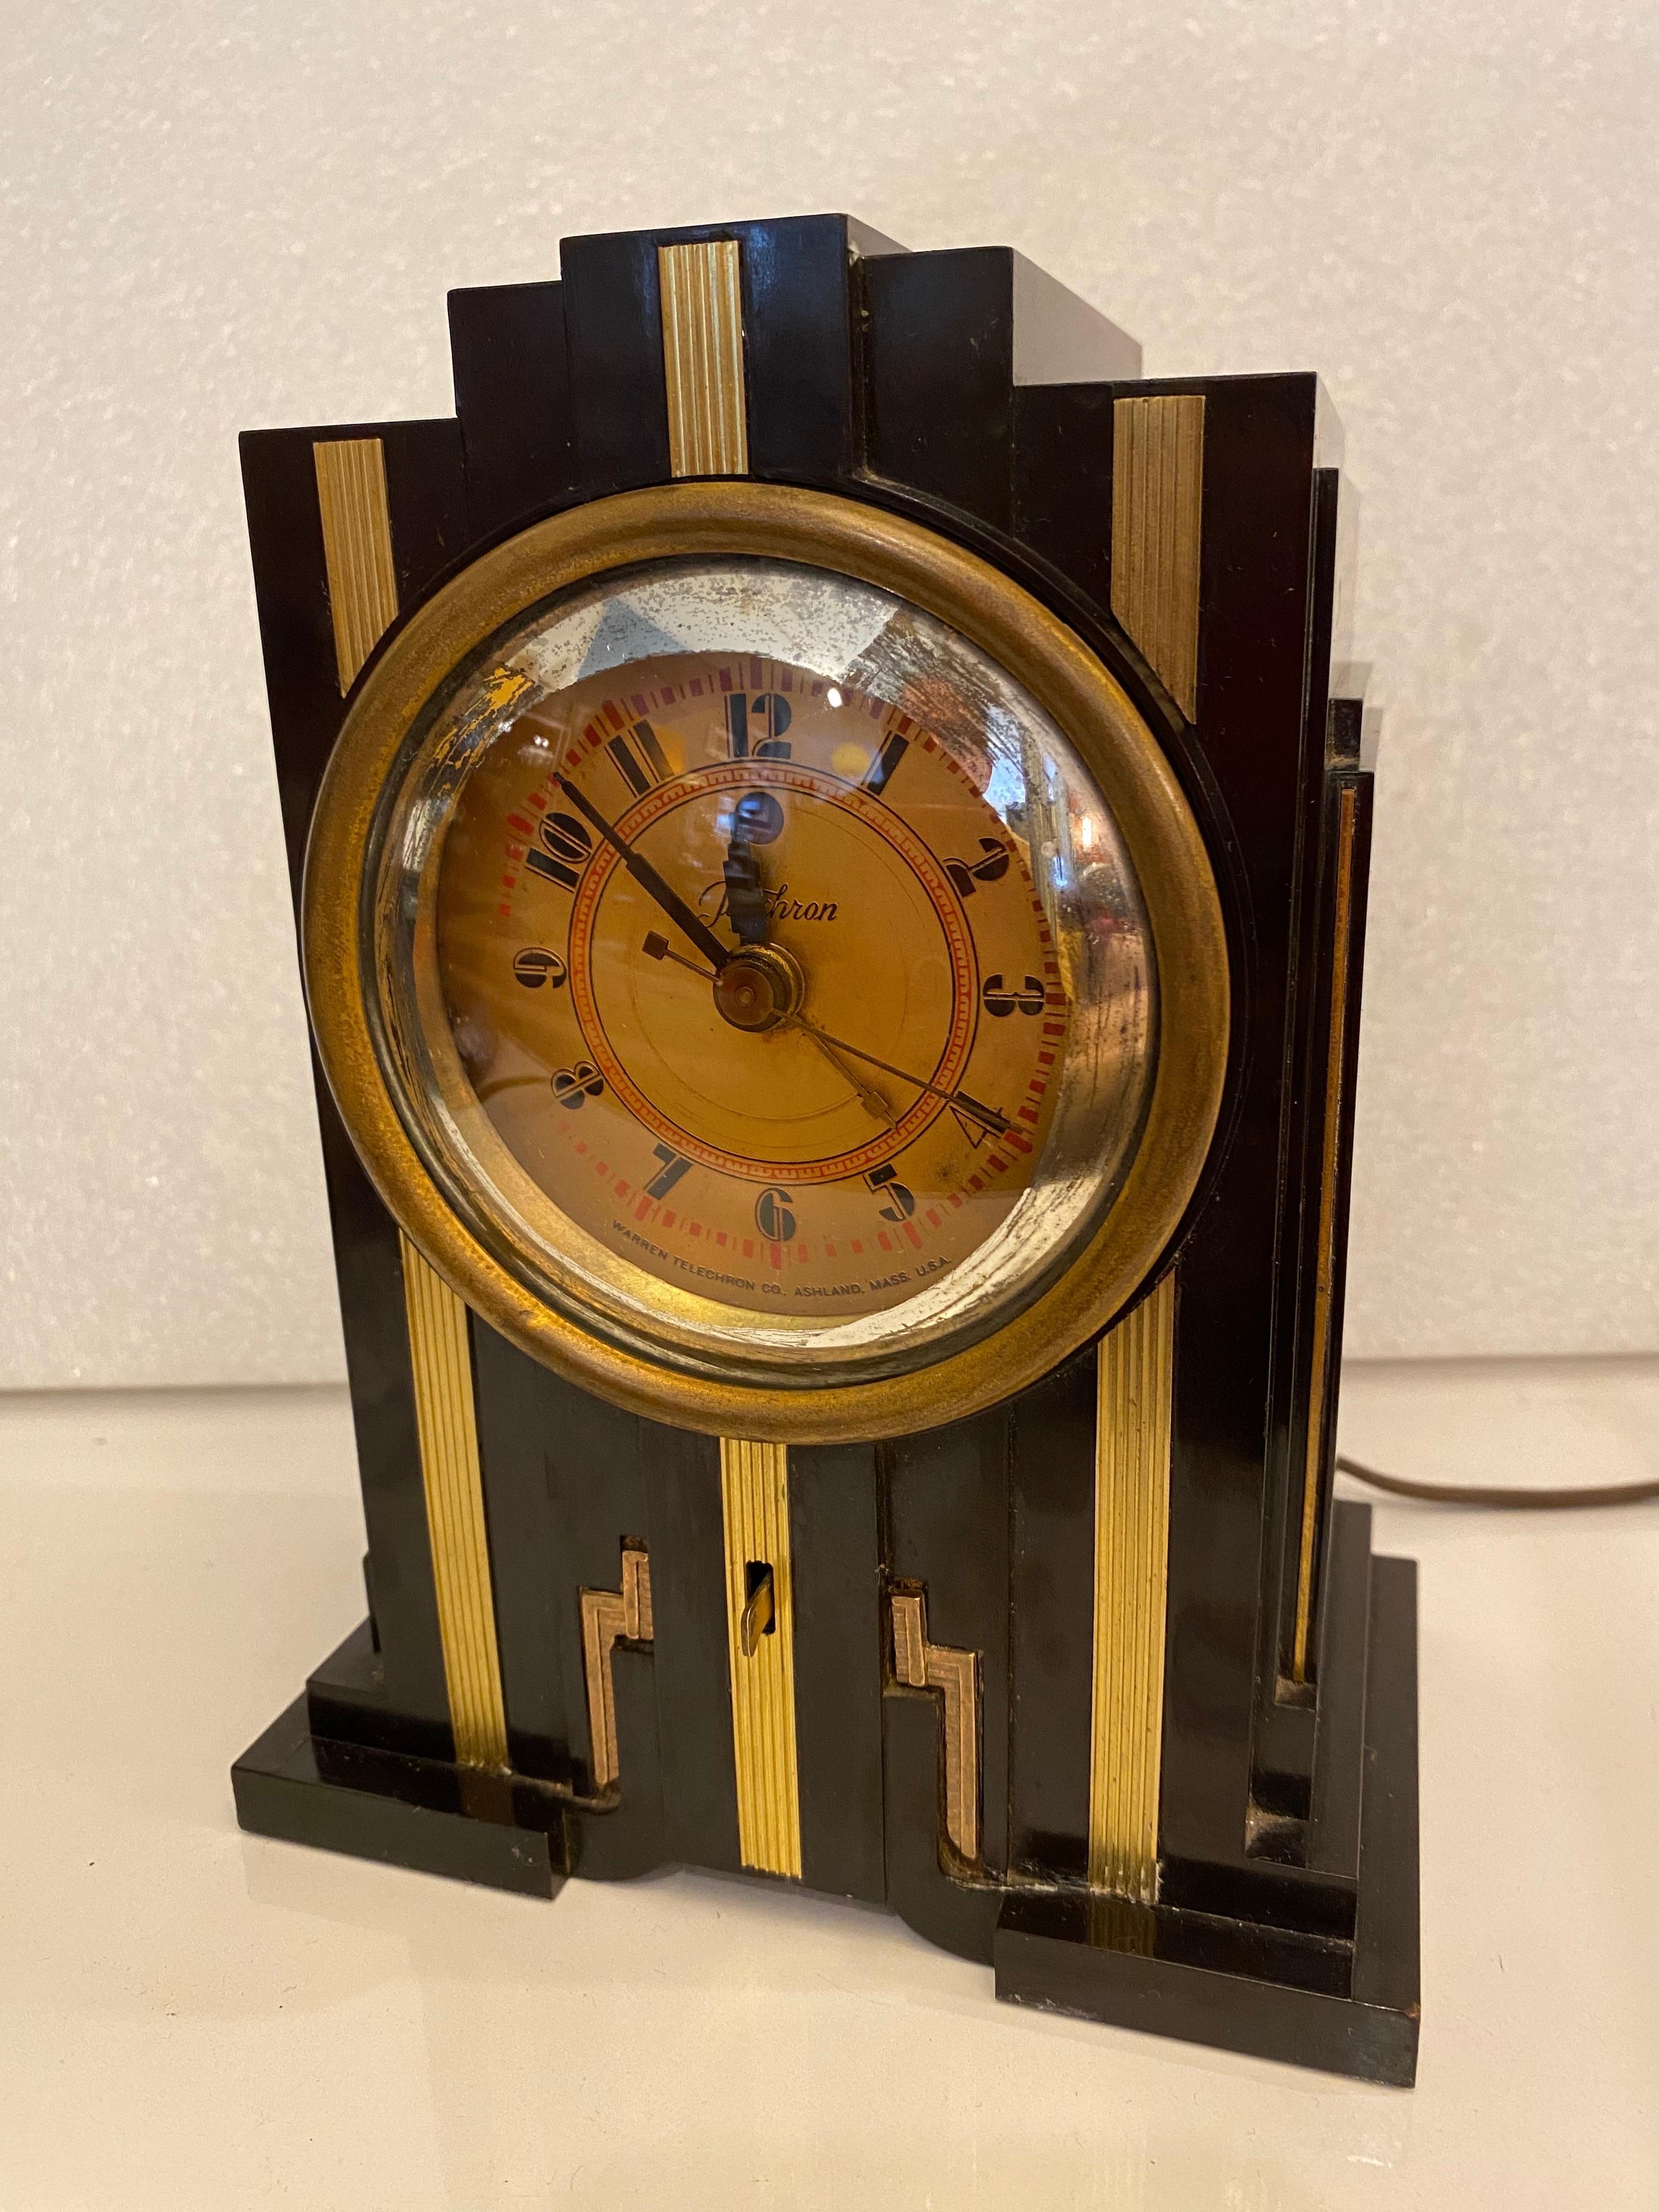 Telechron Electric Skyscraper Bakelite Table Clock.  Working alarm with many of the styling of Paul Frankl's Famous metal Table Clock.  This clock was often said to be designed by Frankl but doubtful.   Bakelite in great shape with no chips or